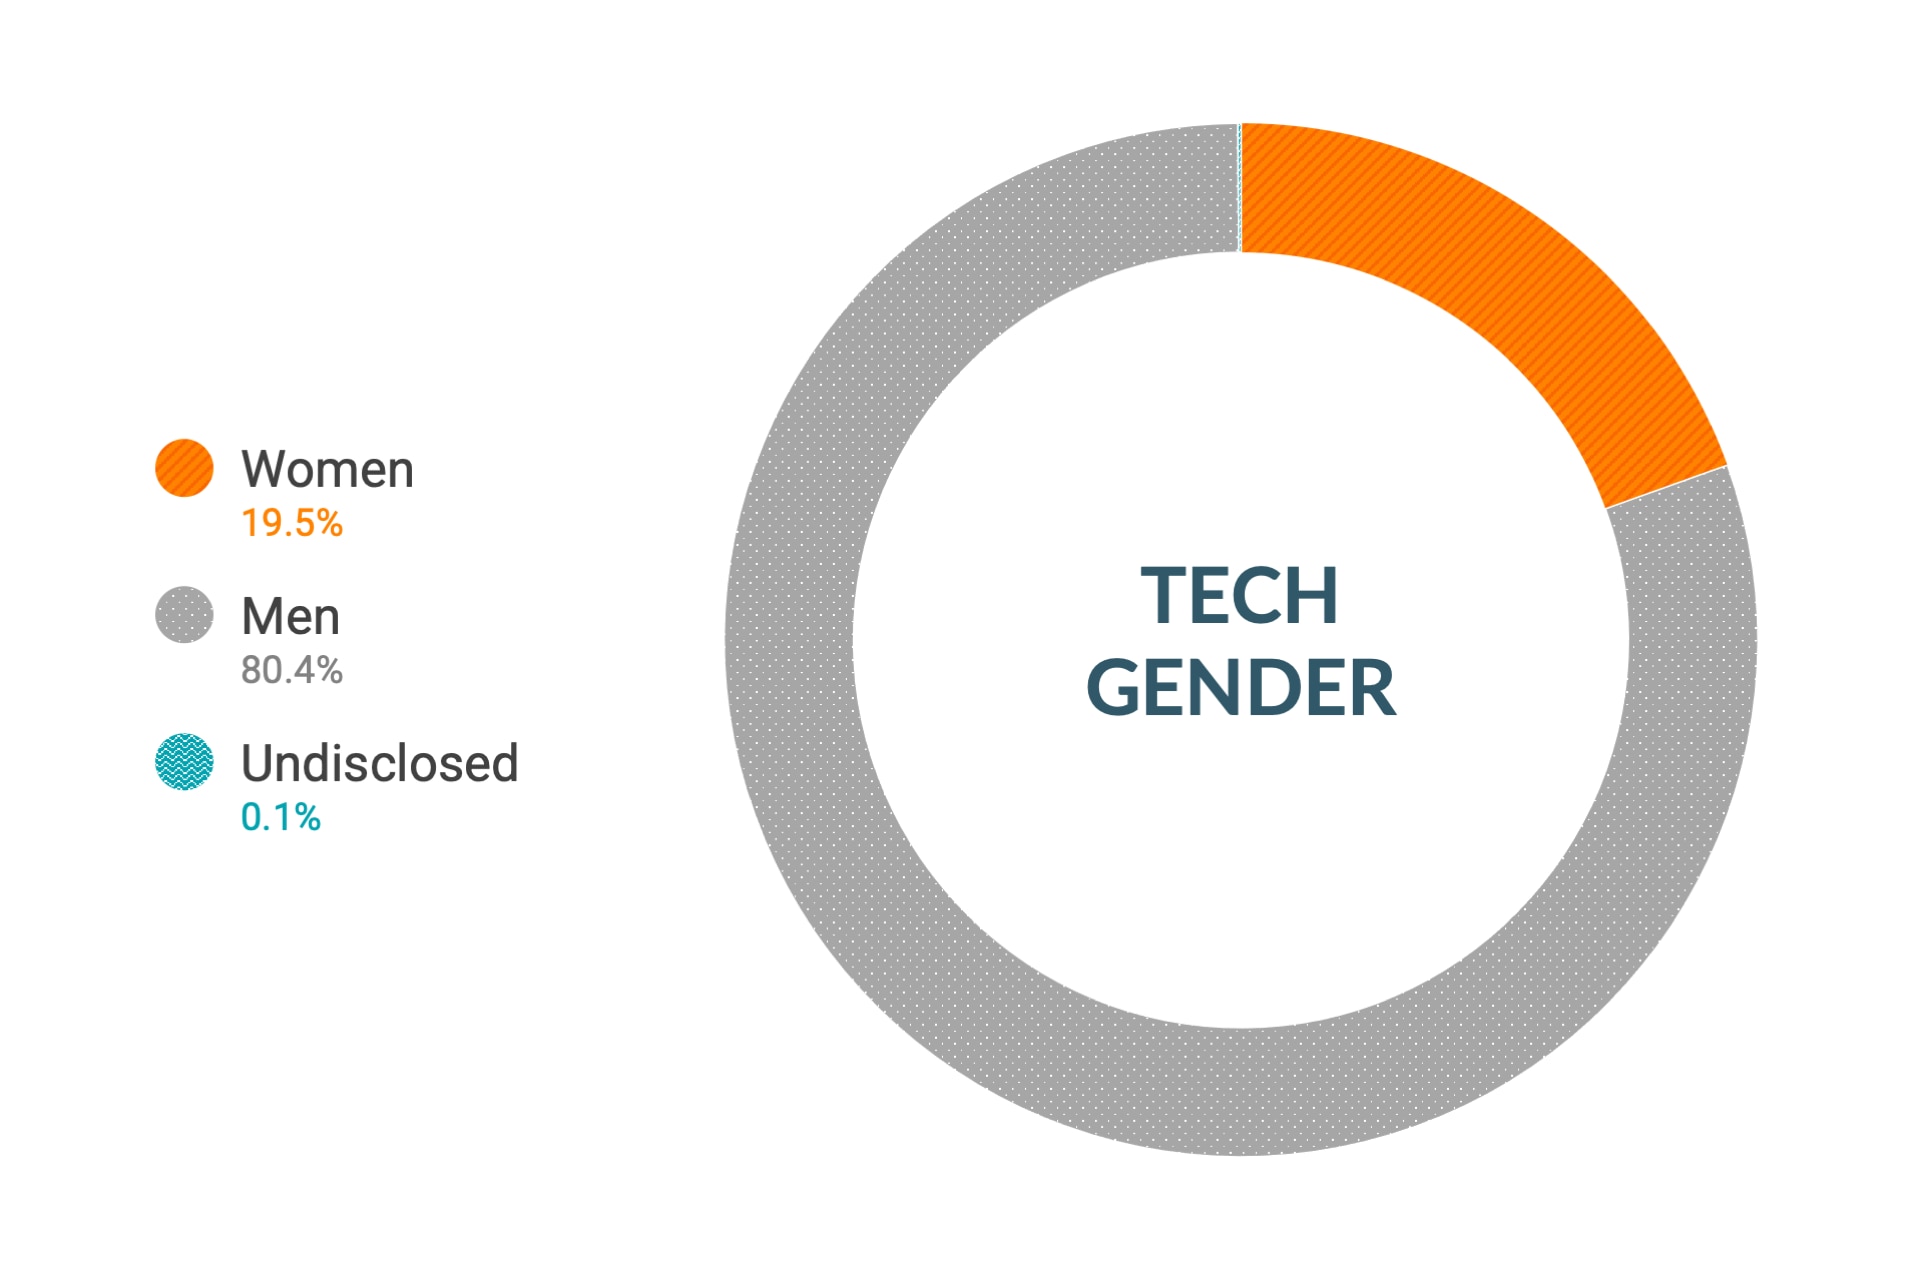 Cloudera Diversity and Inclusion data for Gender in Global Technical and Engineering Roles Roles: Women 17.1%, Men 82.8%, Undisclosed 0.1%